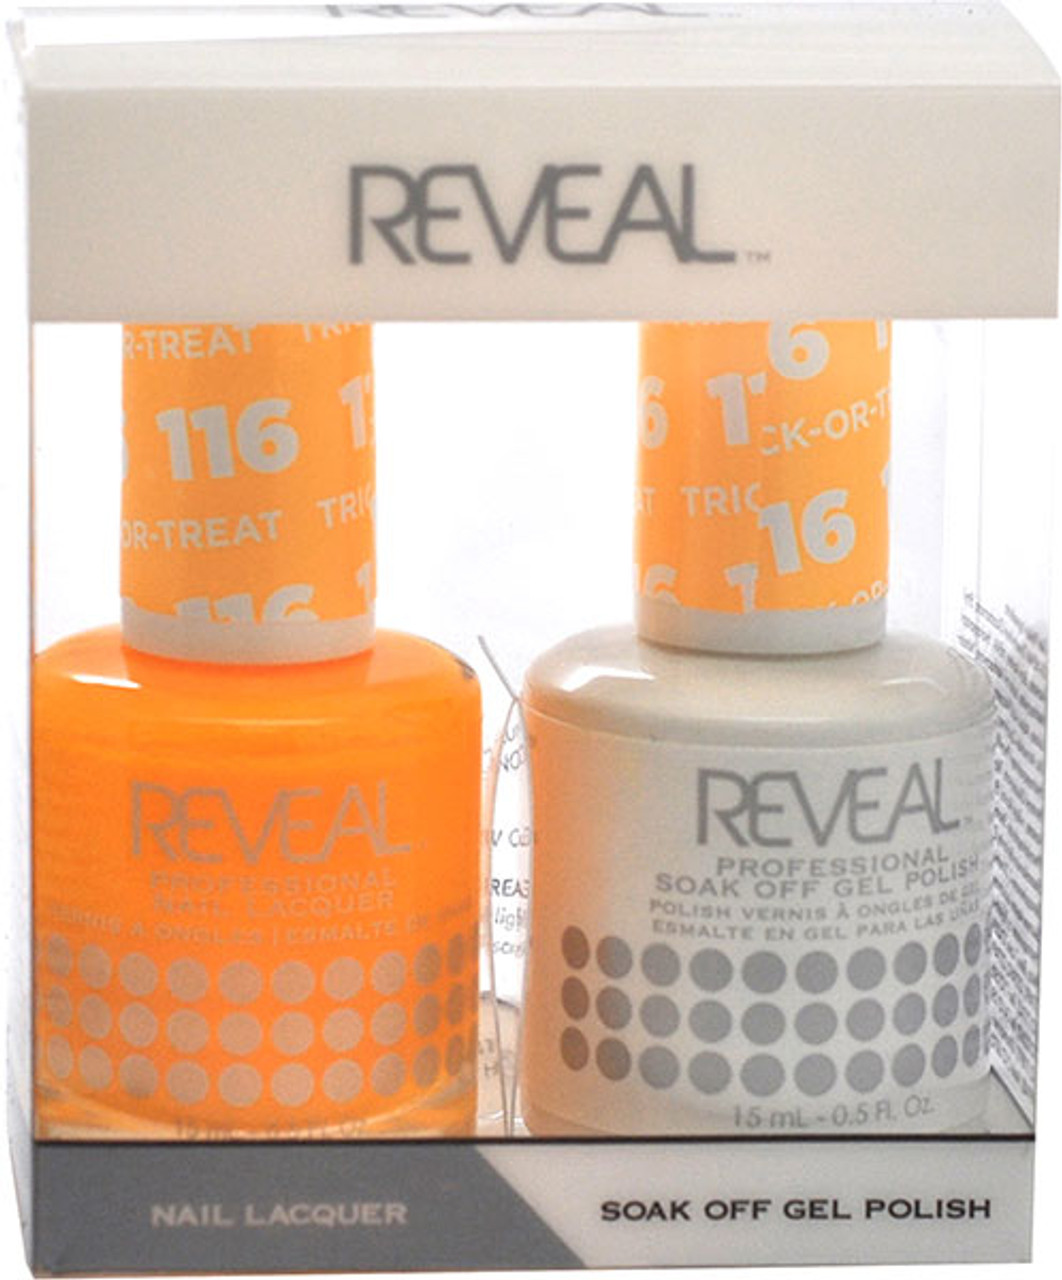 Reveal Gel Polish & Nail Lacquer Matching Duo - TRICK-OR-TREAT - .5 oz